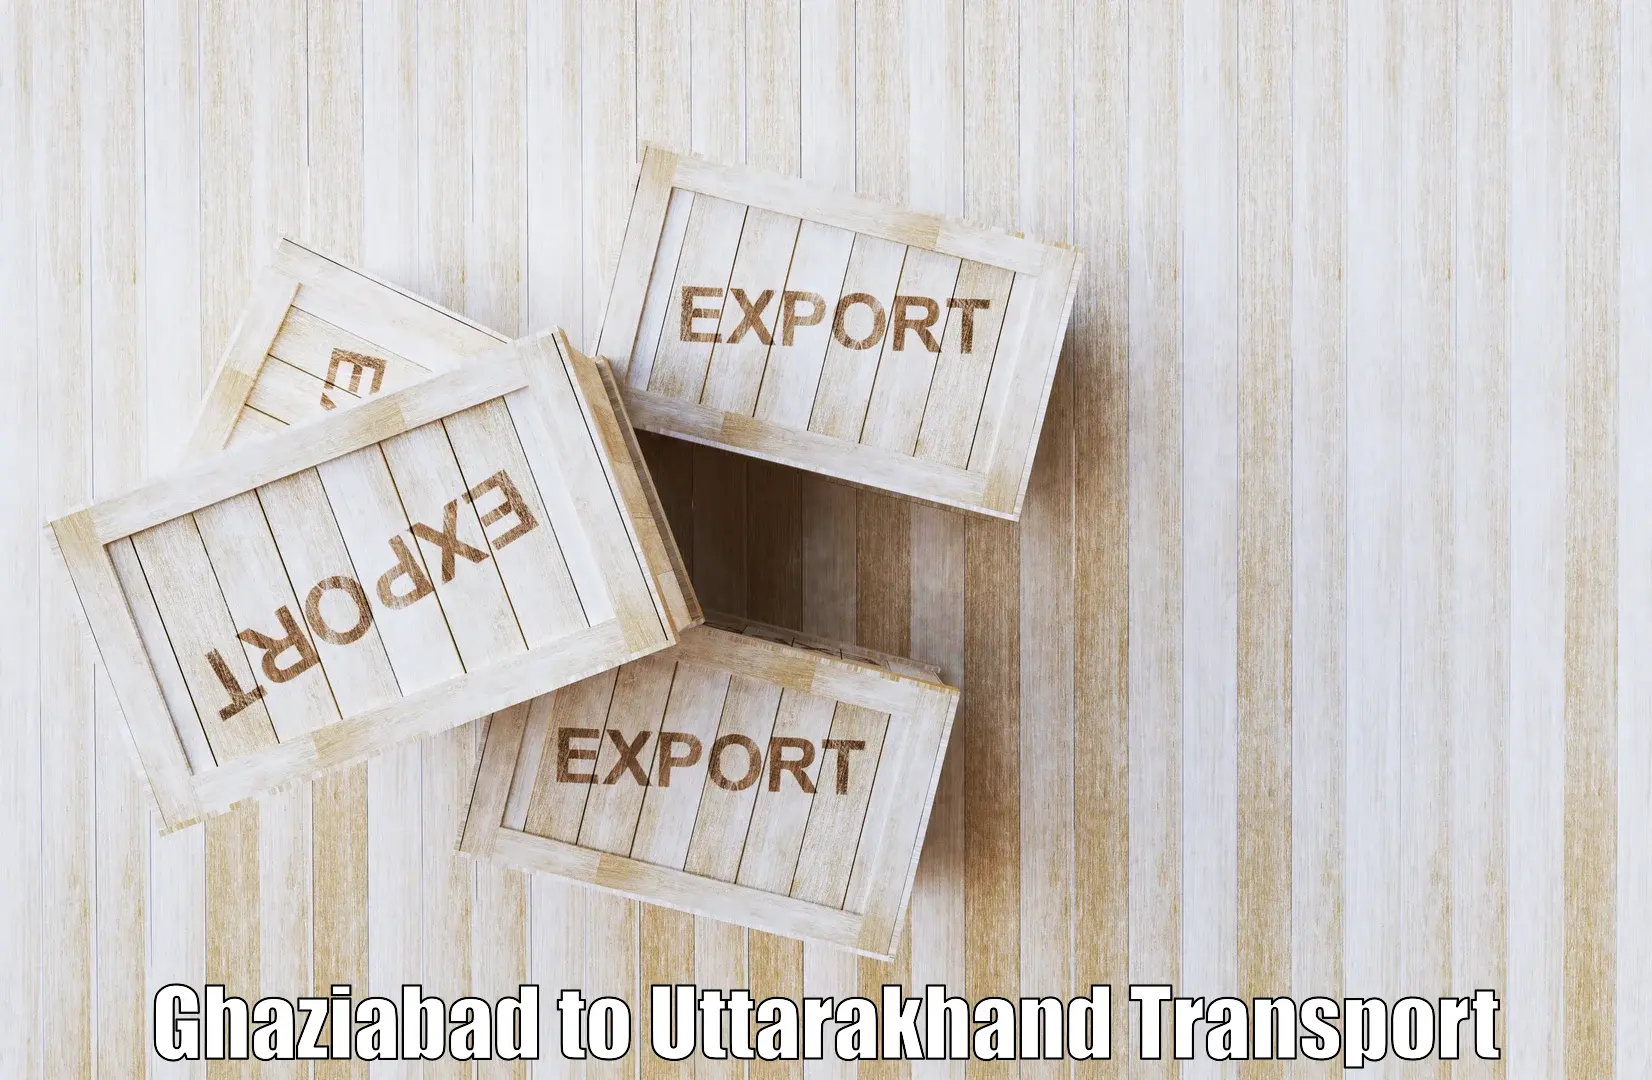 Transport shared services in Ghaziabad to Pauri Garhwal